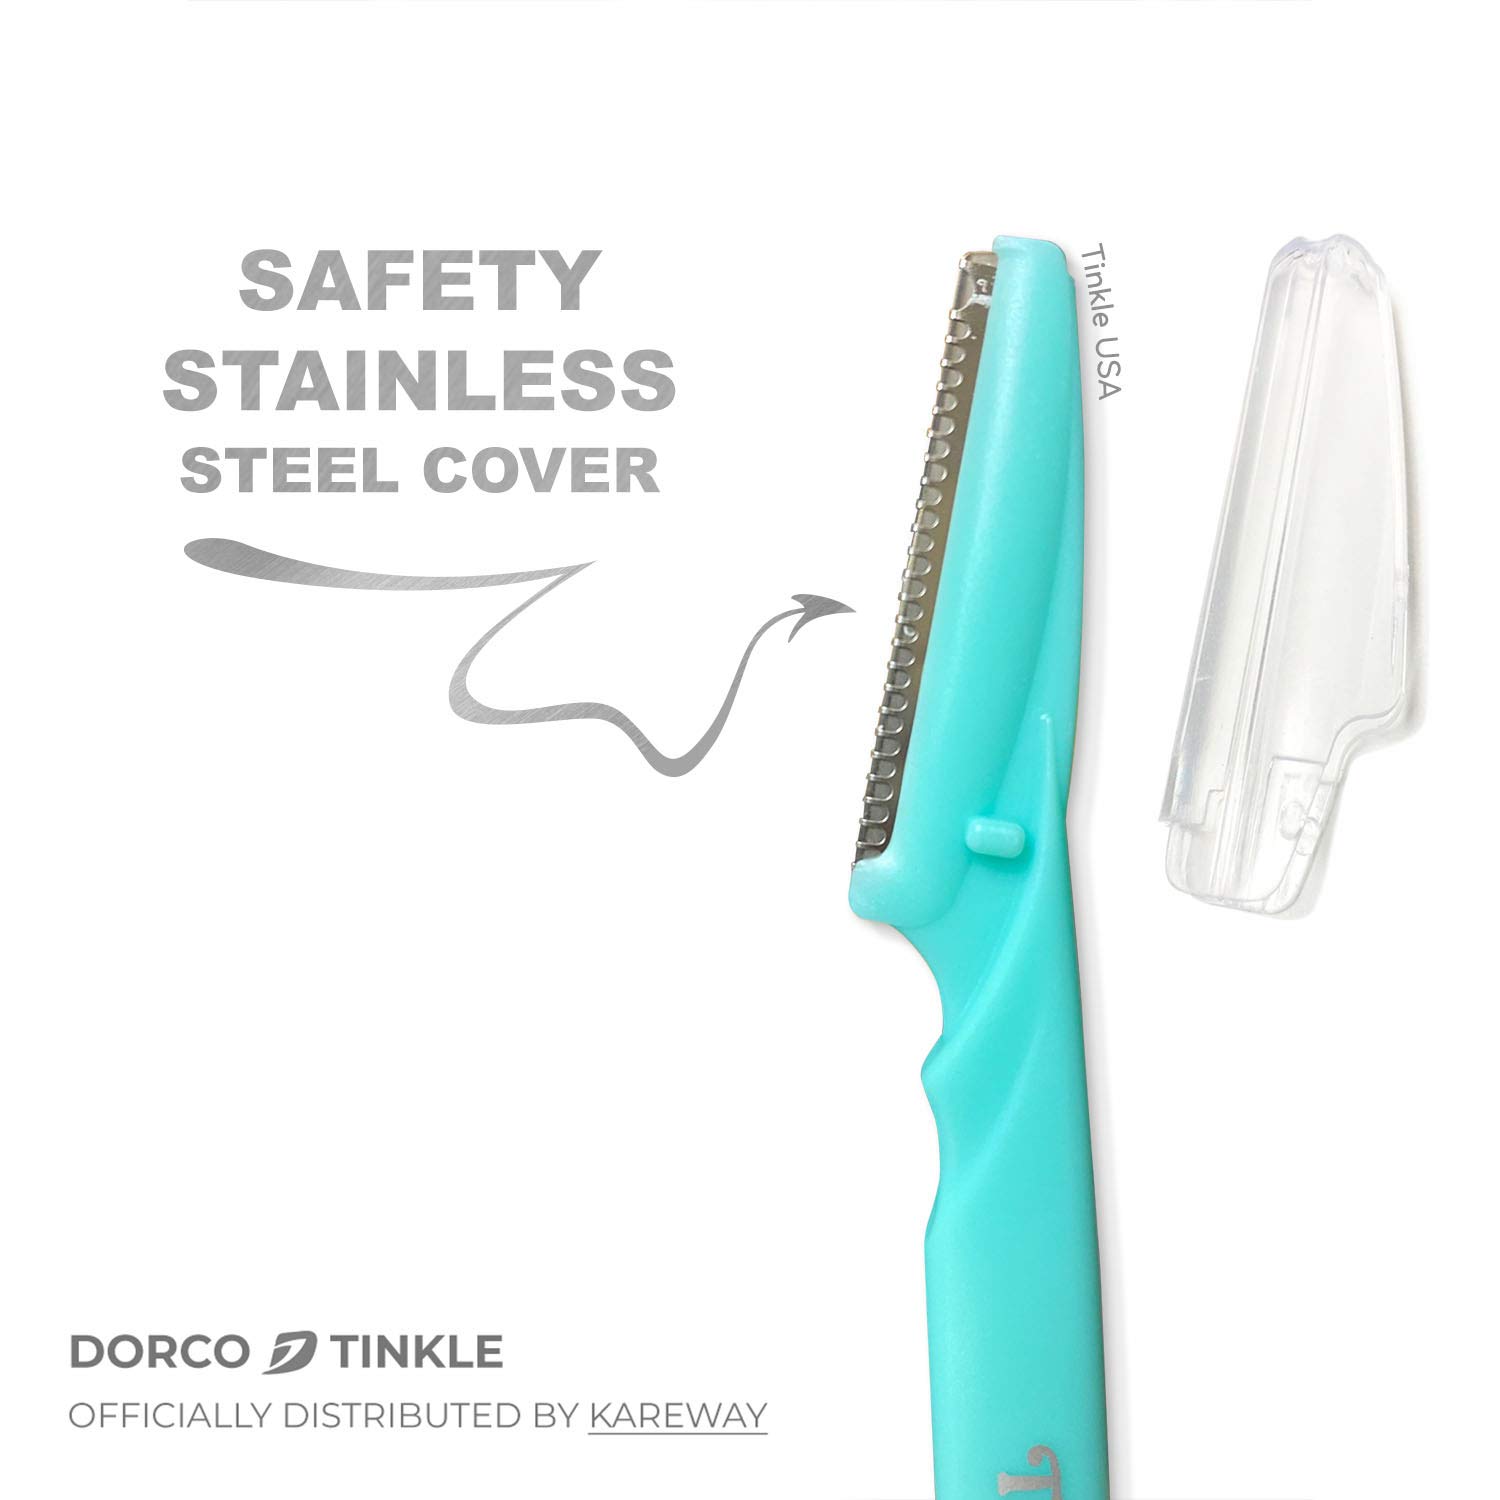 Dorco Tinkle Eyebrow Razors for Women, 12 Razors [3ct per pack(4pk)], Eyebrow Trimmer Dermaplaning Tool for Safe and Easy Facial Hair Removal for Women, Exfoliating Face With Stainless Steel Safety Cover for Sensitive Skin.